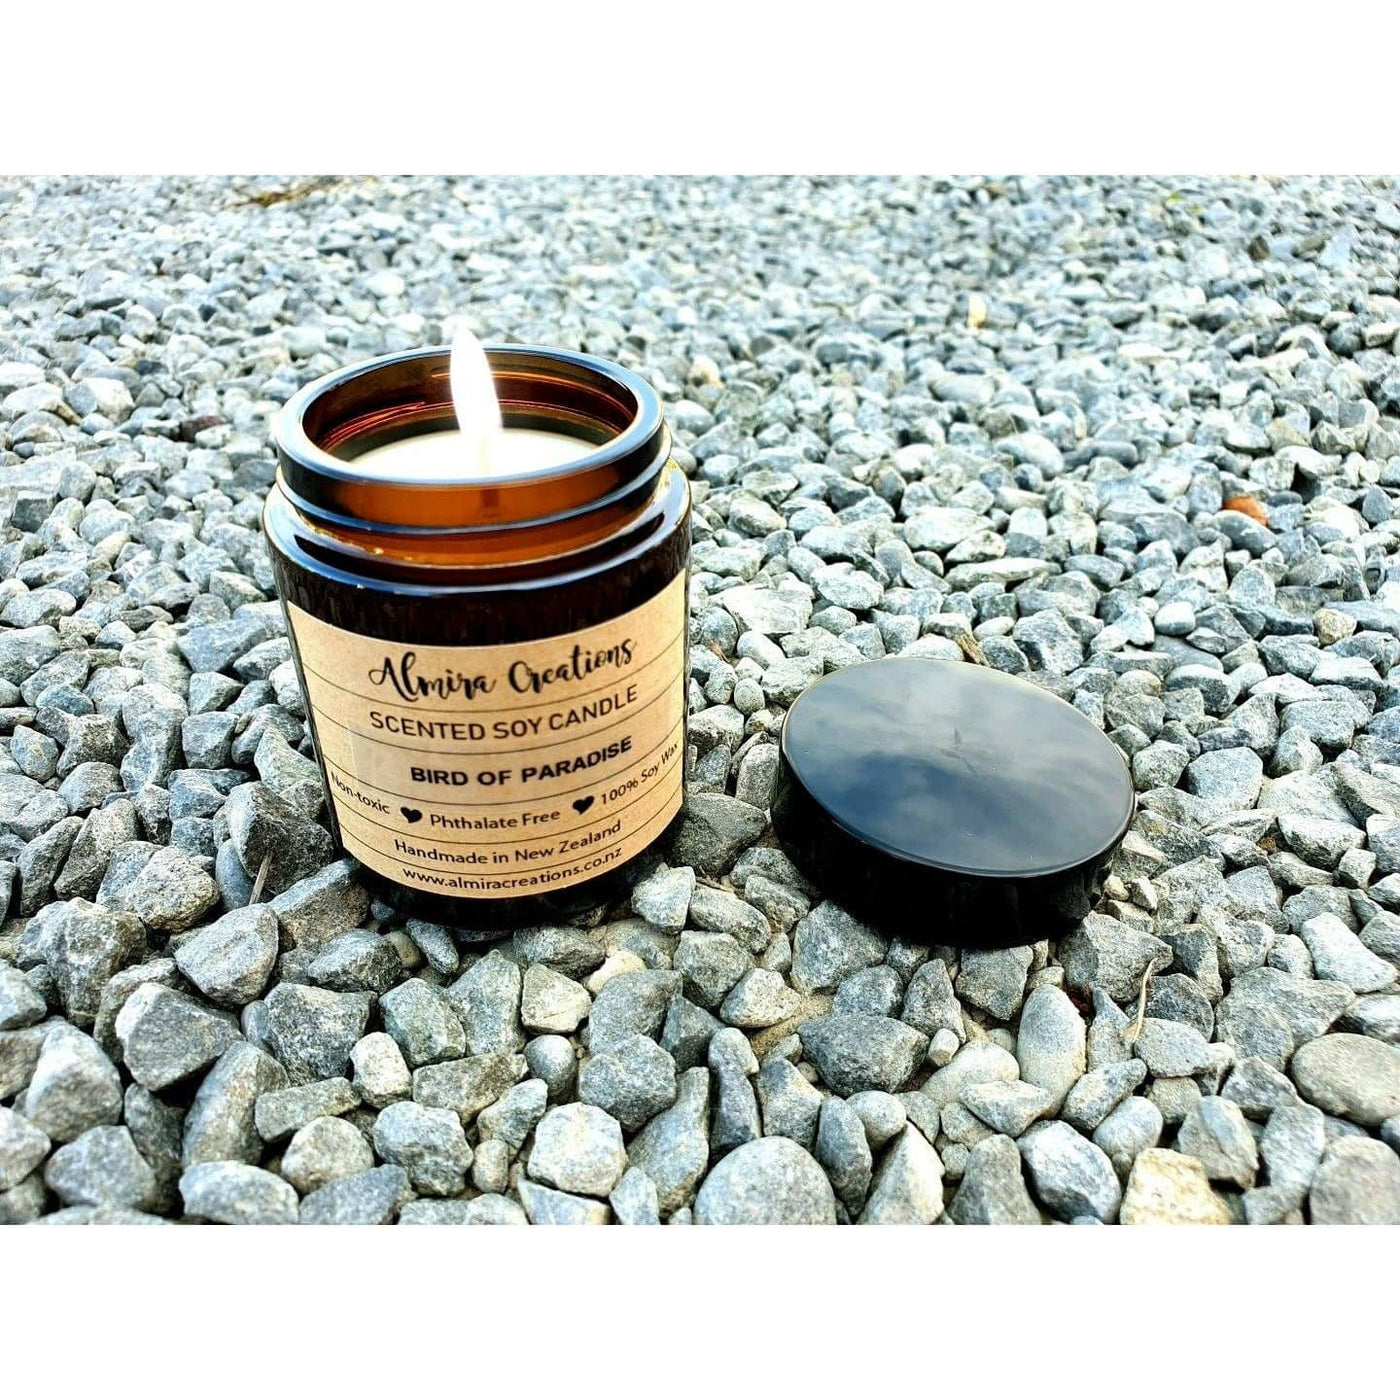 Bird of Paradise - Scented Soy Candle - Almira Creations